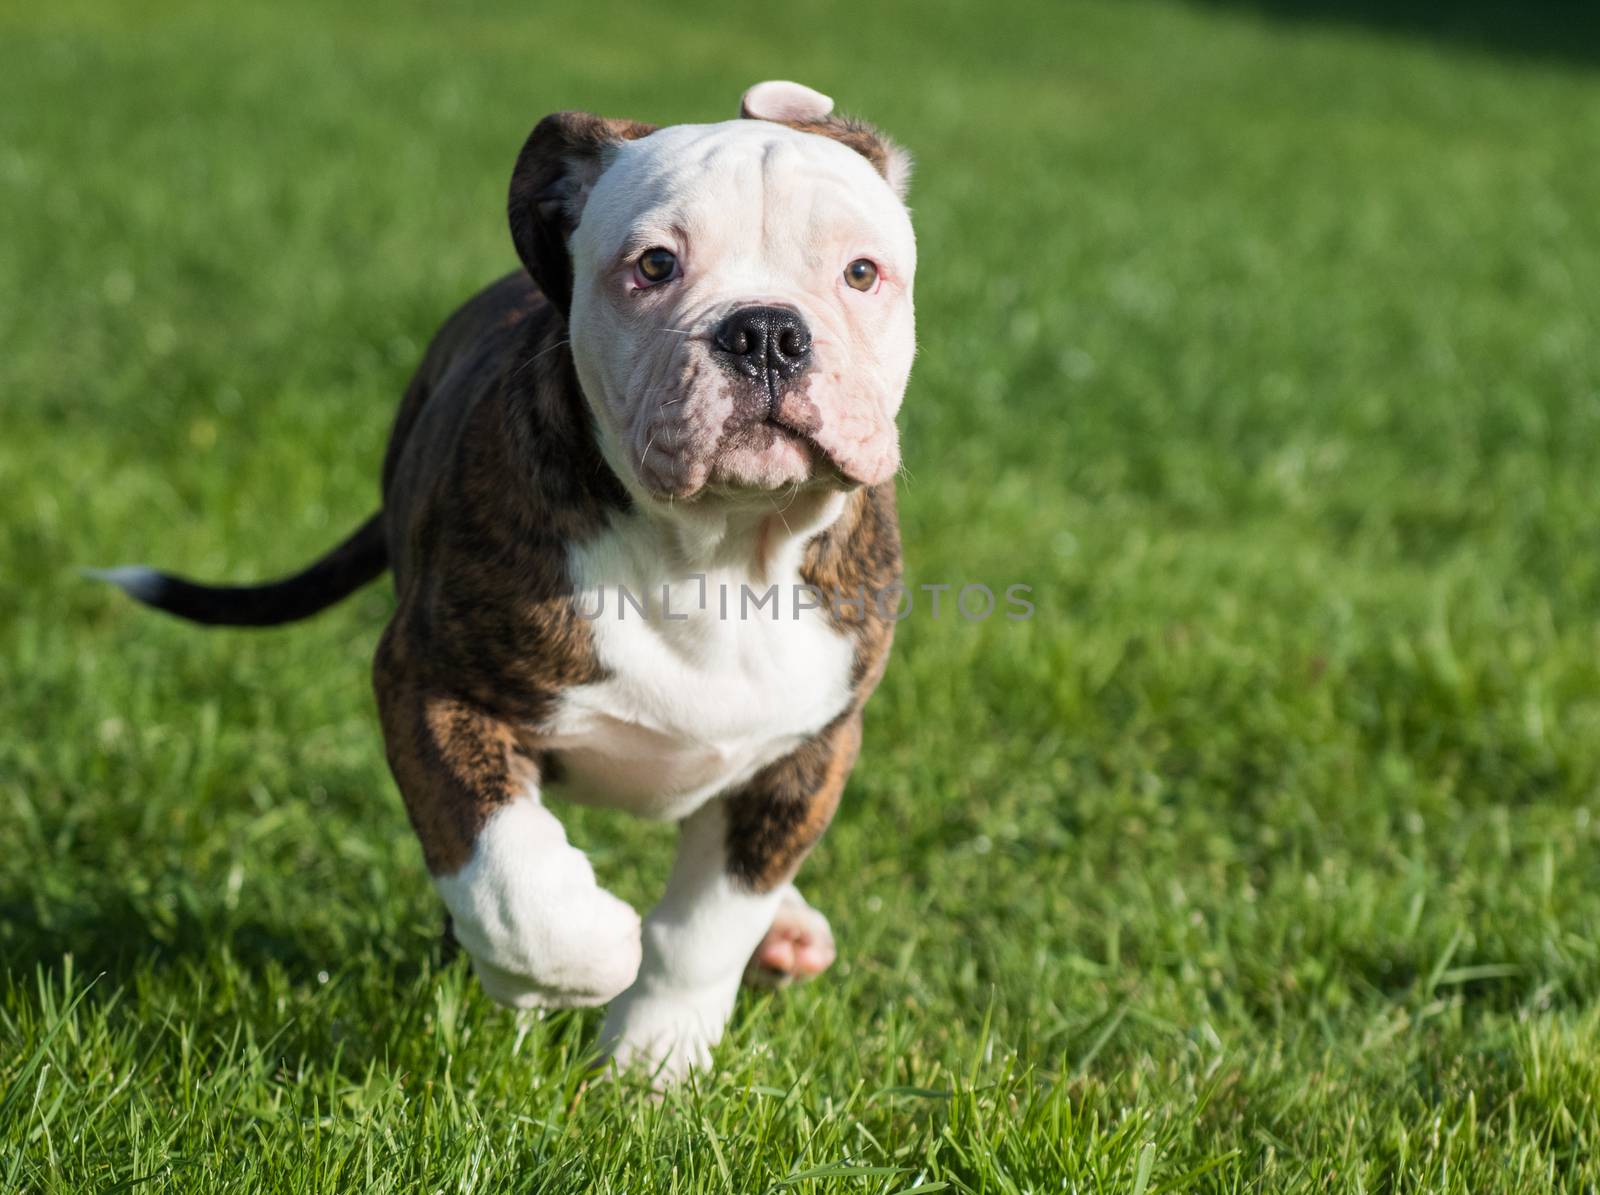 Funny Brindle coat American Bulldog puppy dog in move on nature on green grass.